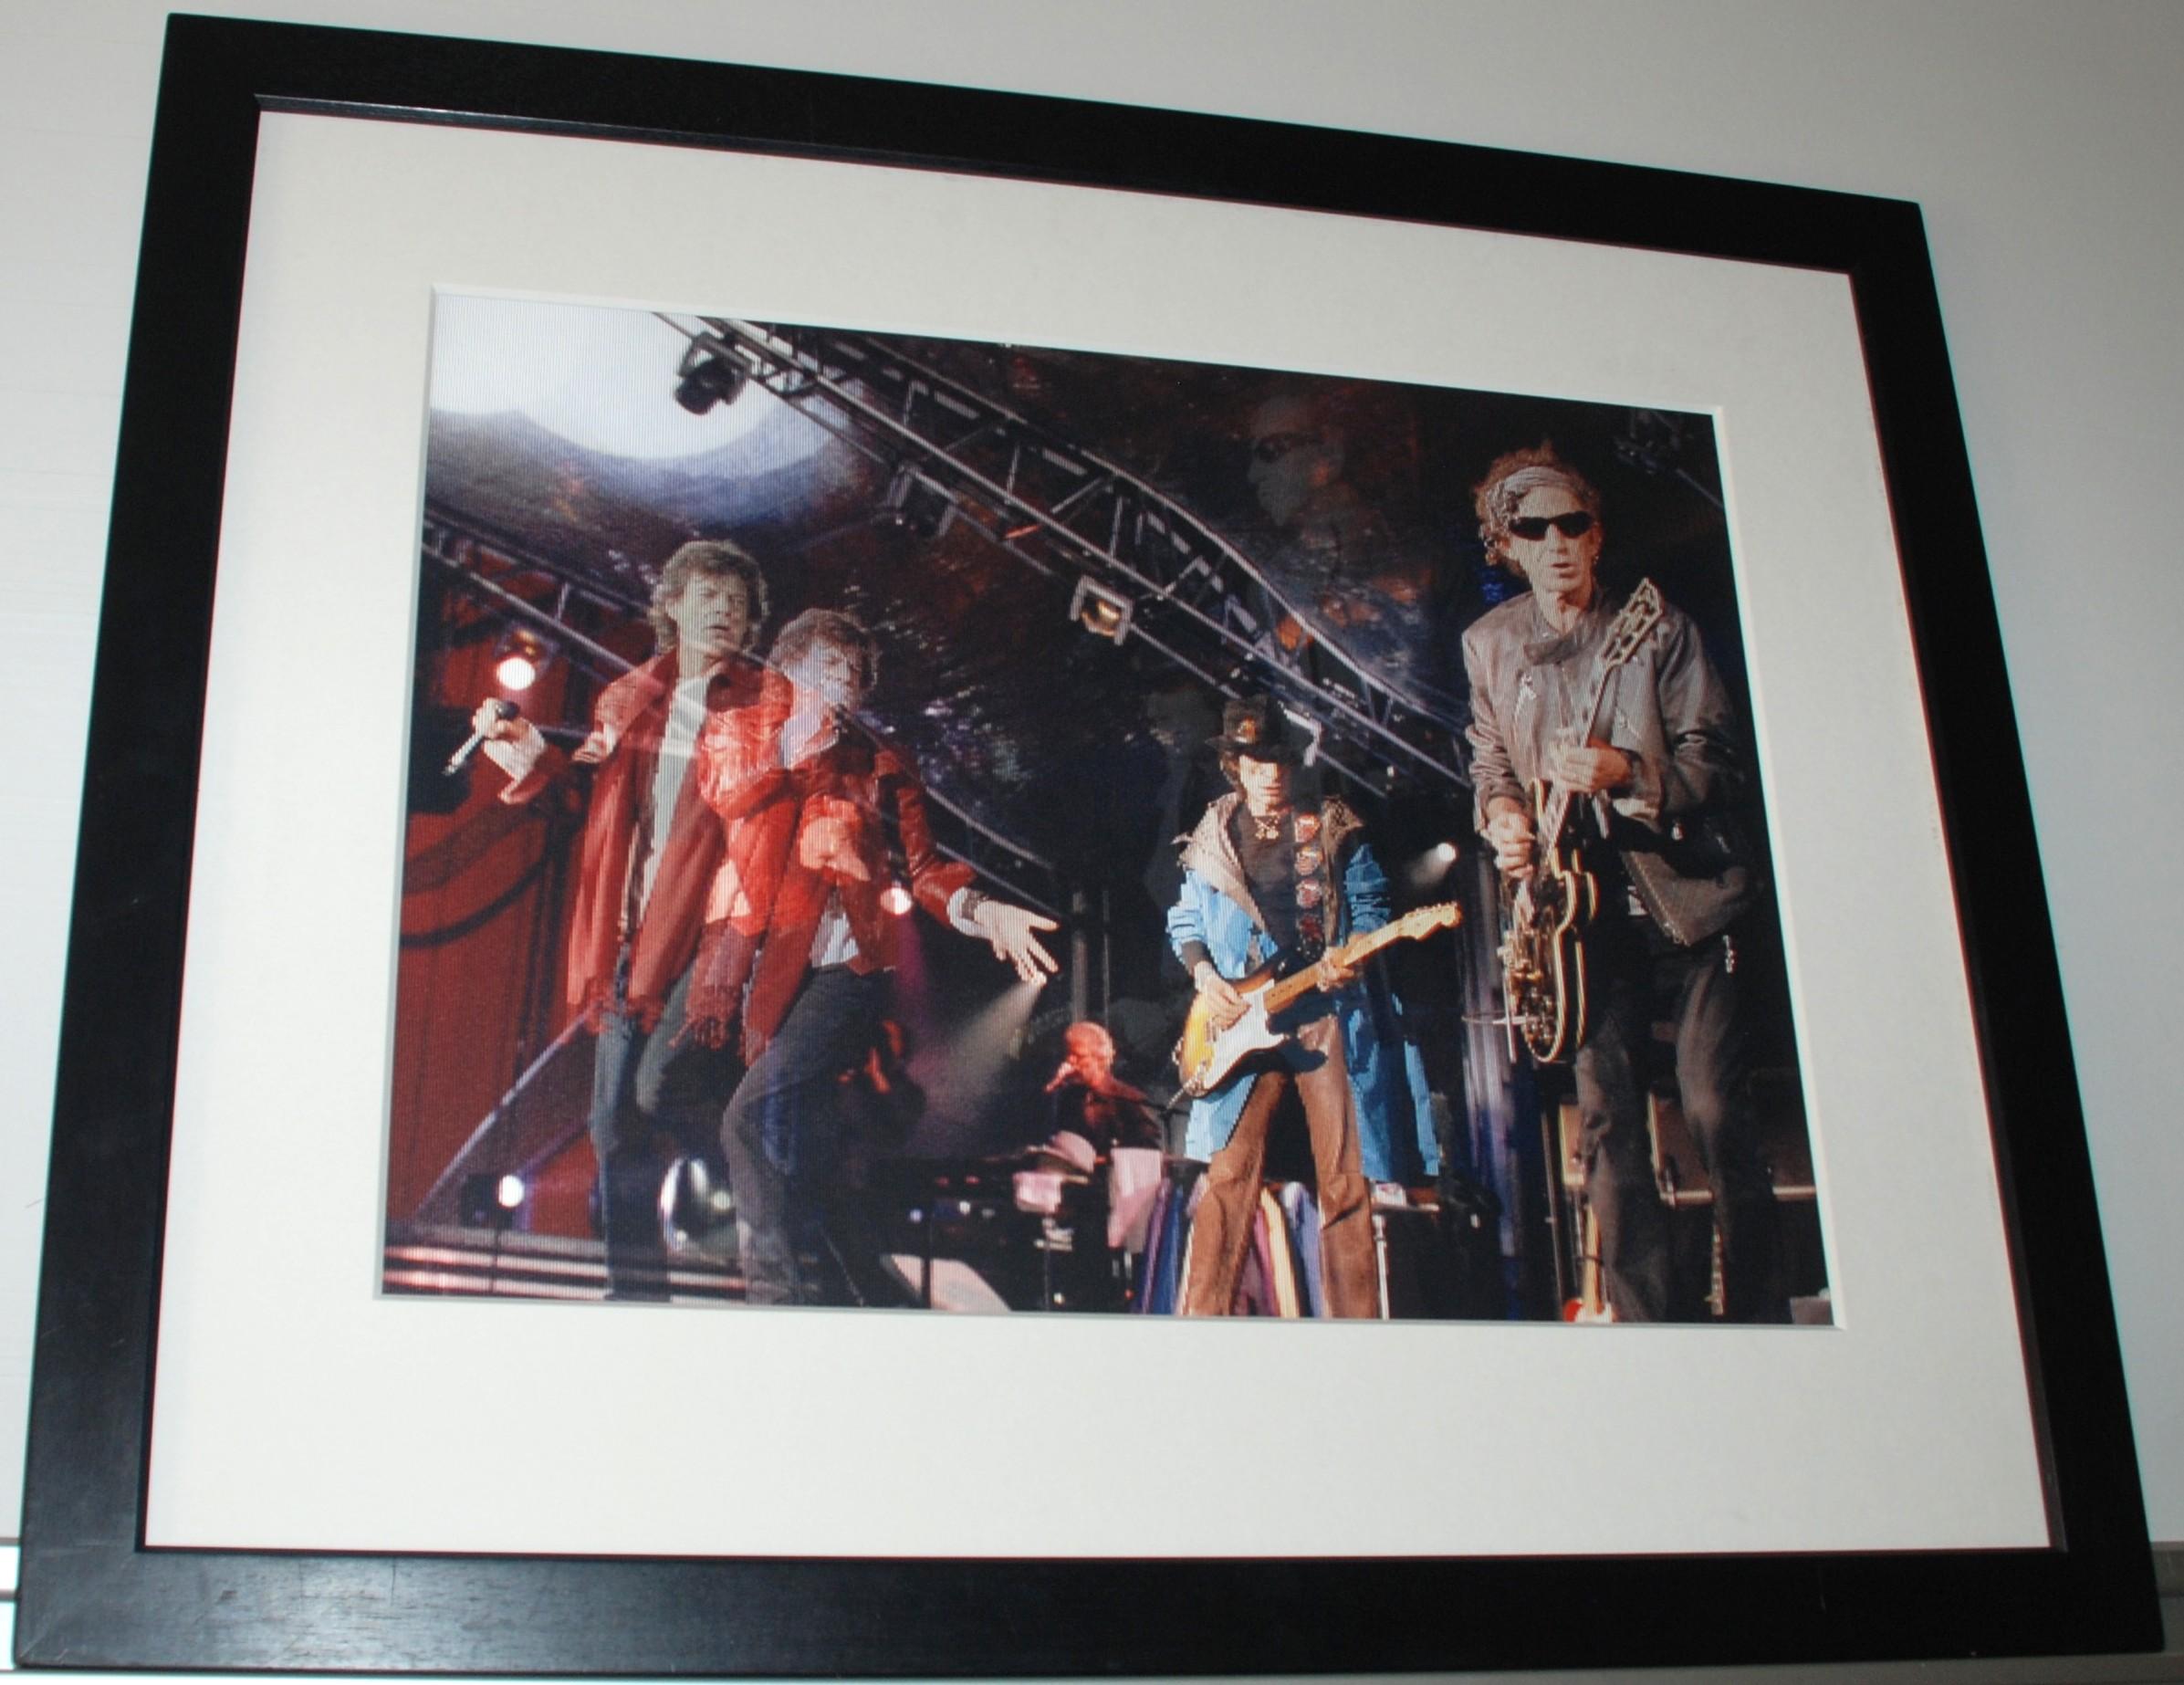 Artist: Jay Blakesberg
Medium: Lenticular photograph
Title: Rolling Stones
Edition: sold out edition
Framed Size: 33 1/2 x 27 3/4 inches